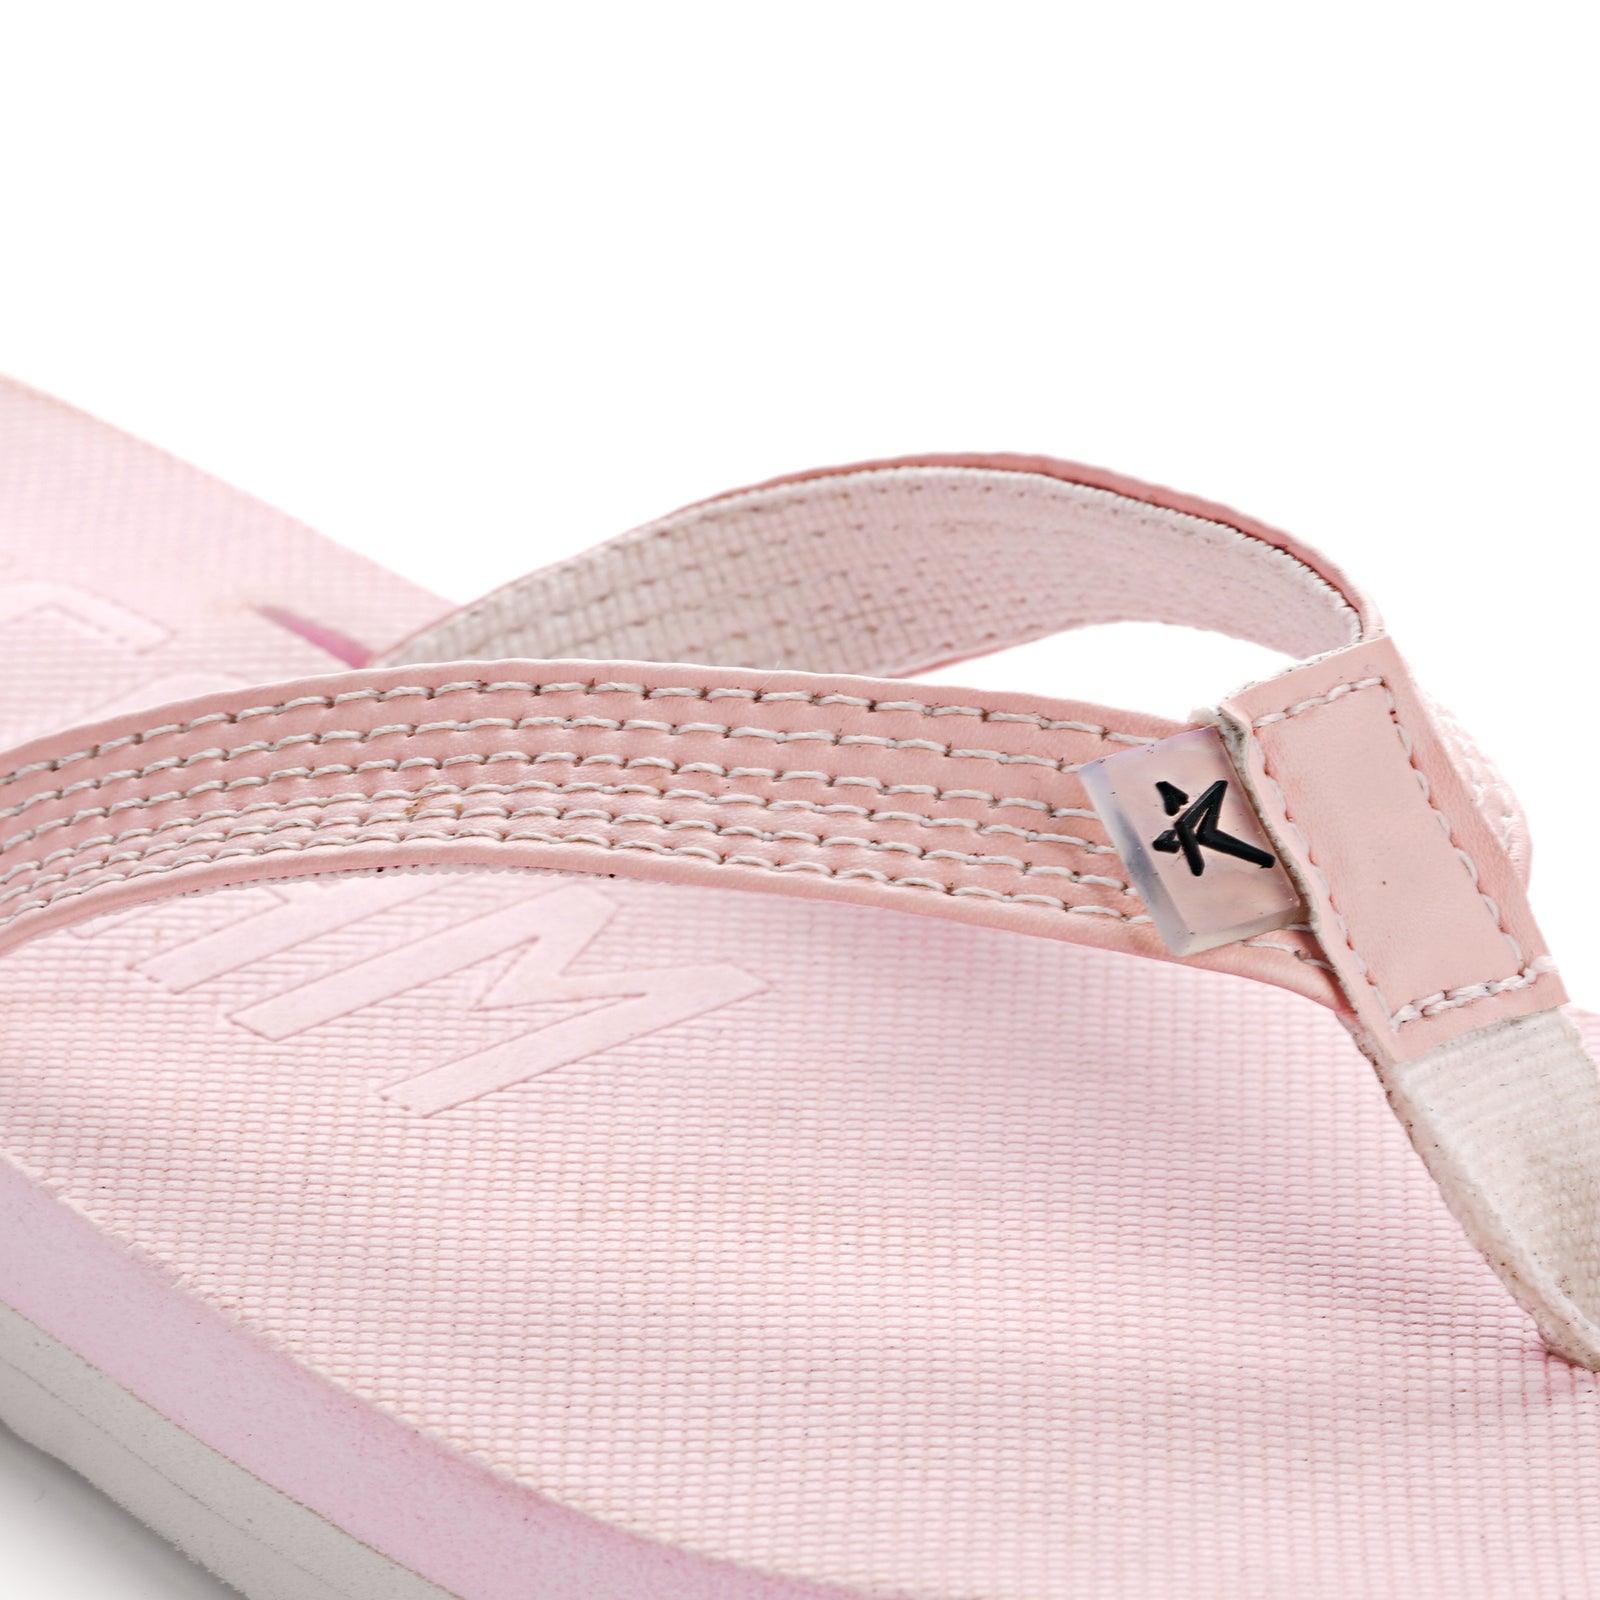 Pink Solid Textile Slip On Casual Slippers For Women